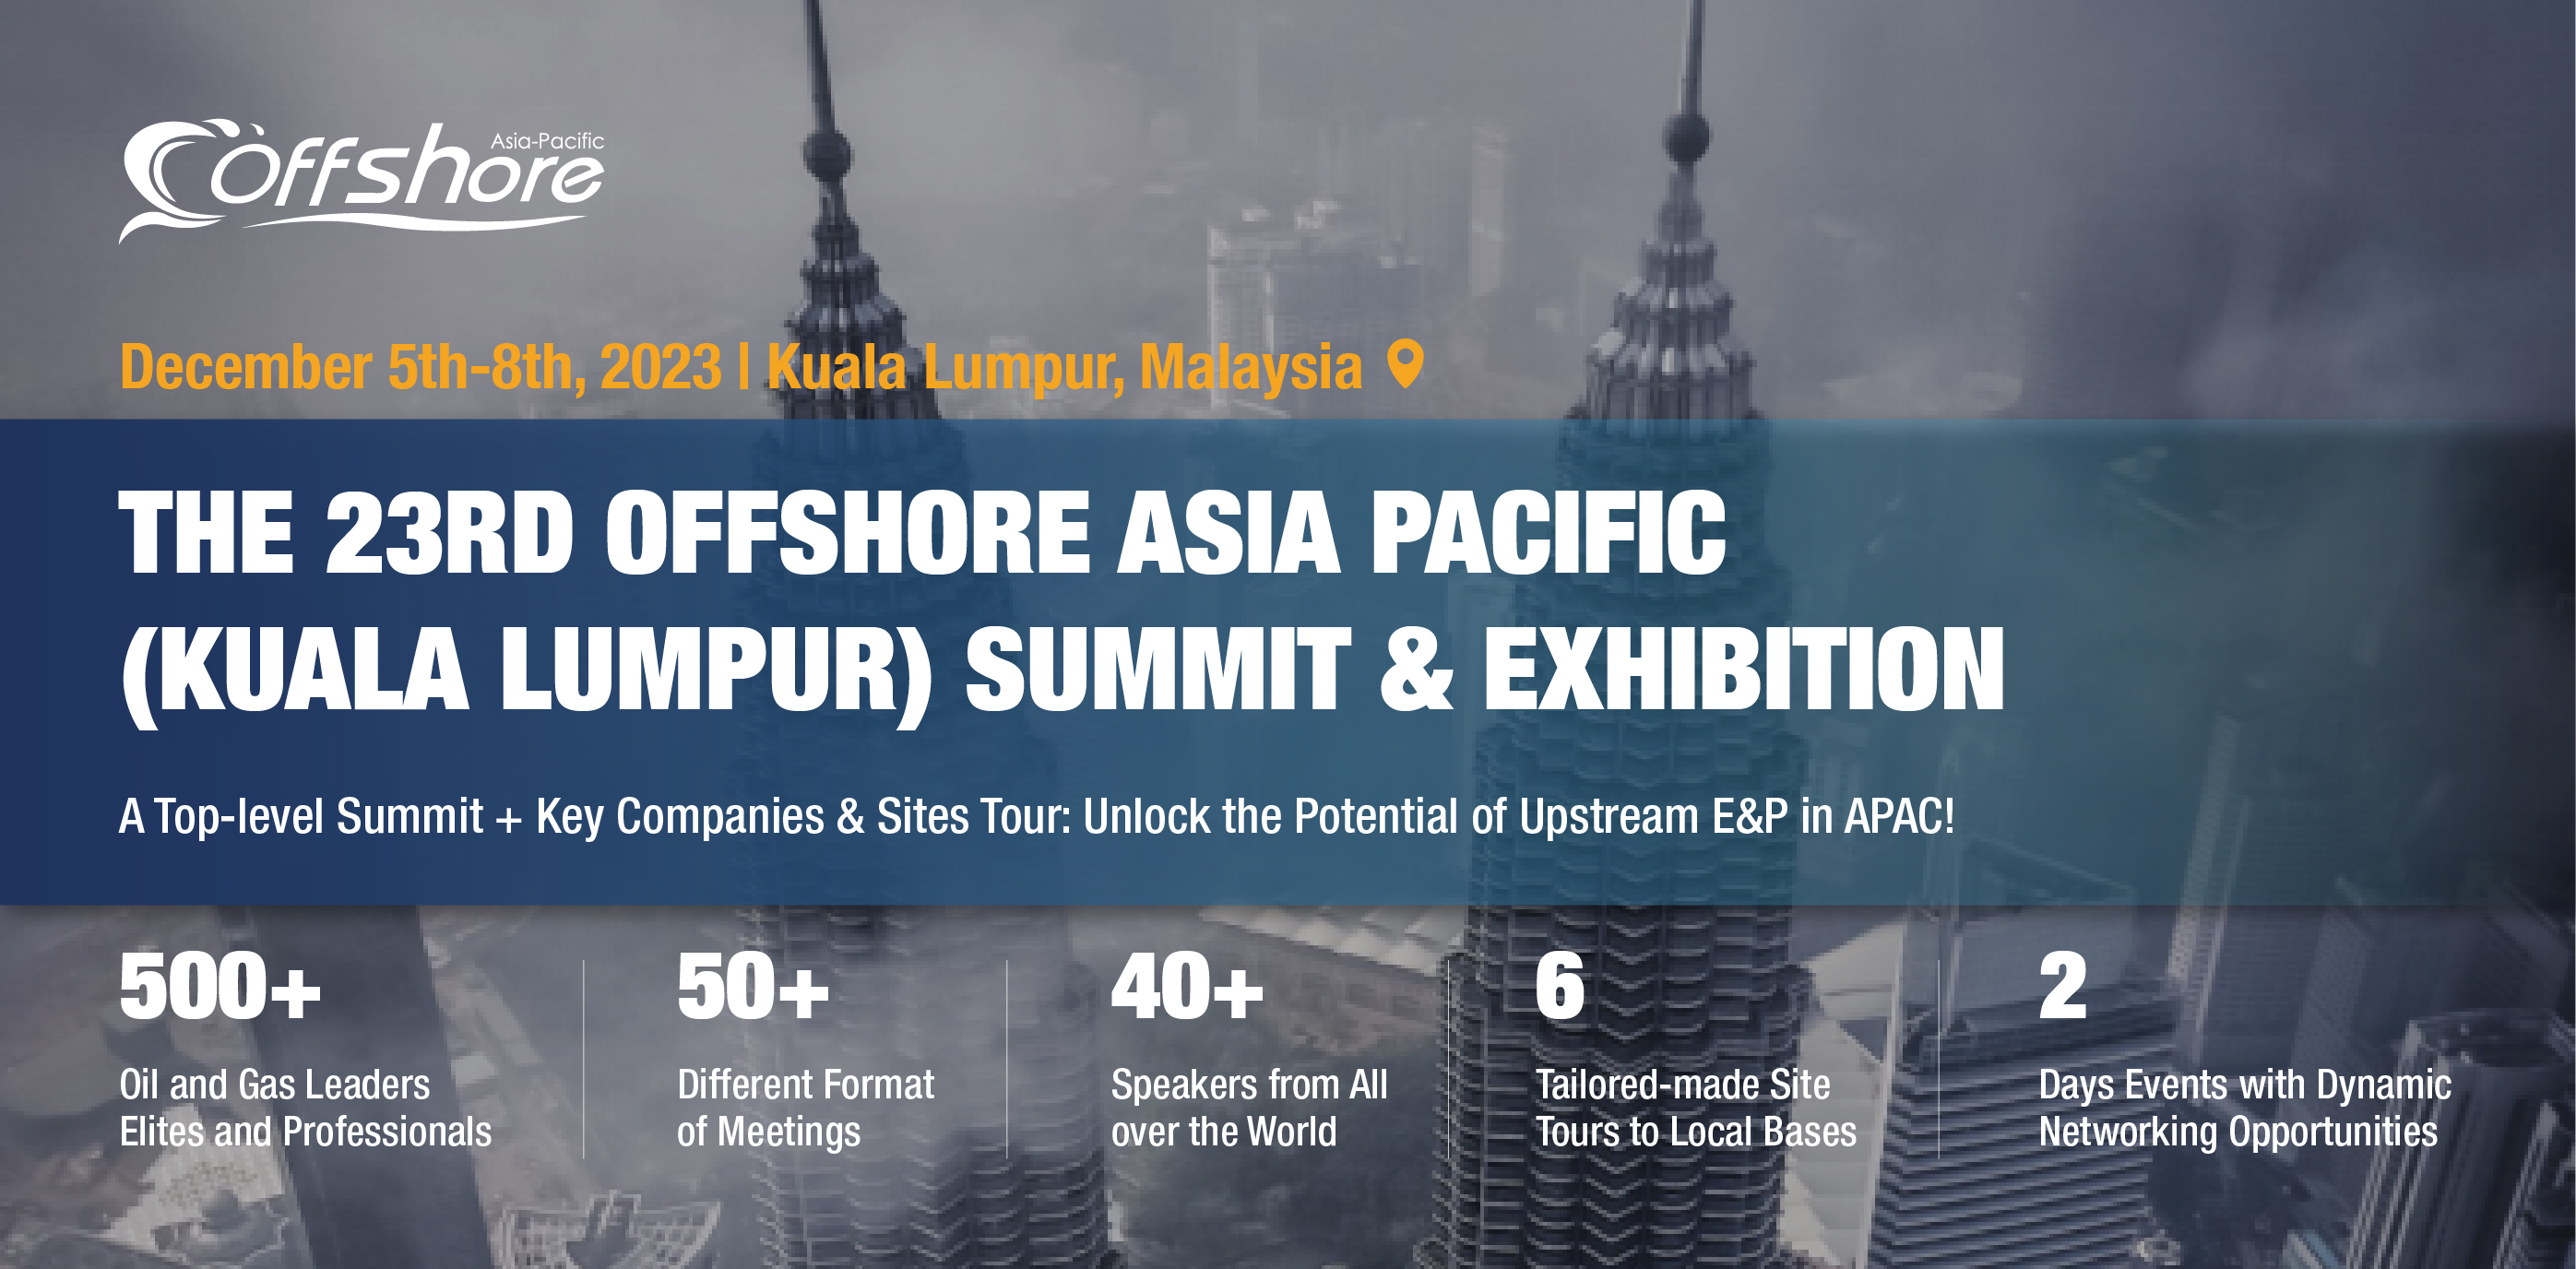 The 23rd Offshore Asia-Pacific Summit&